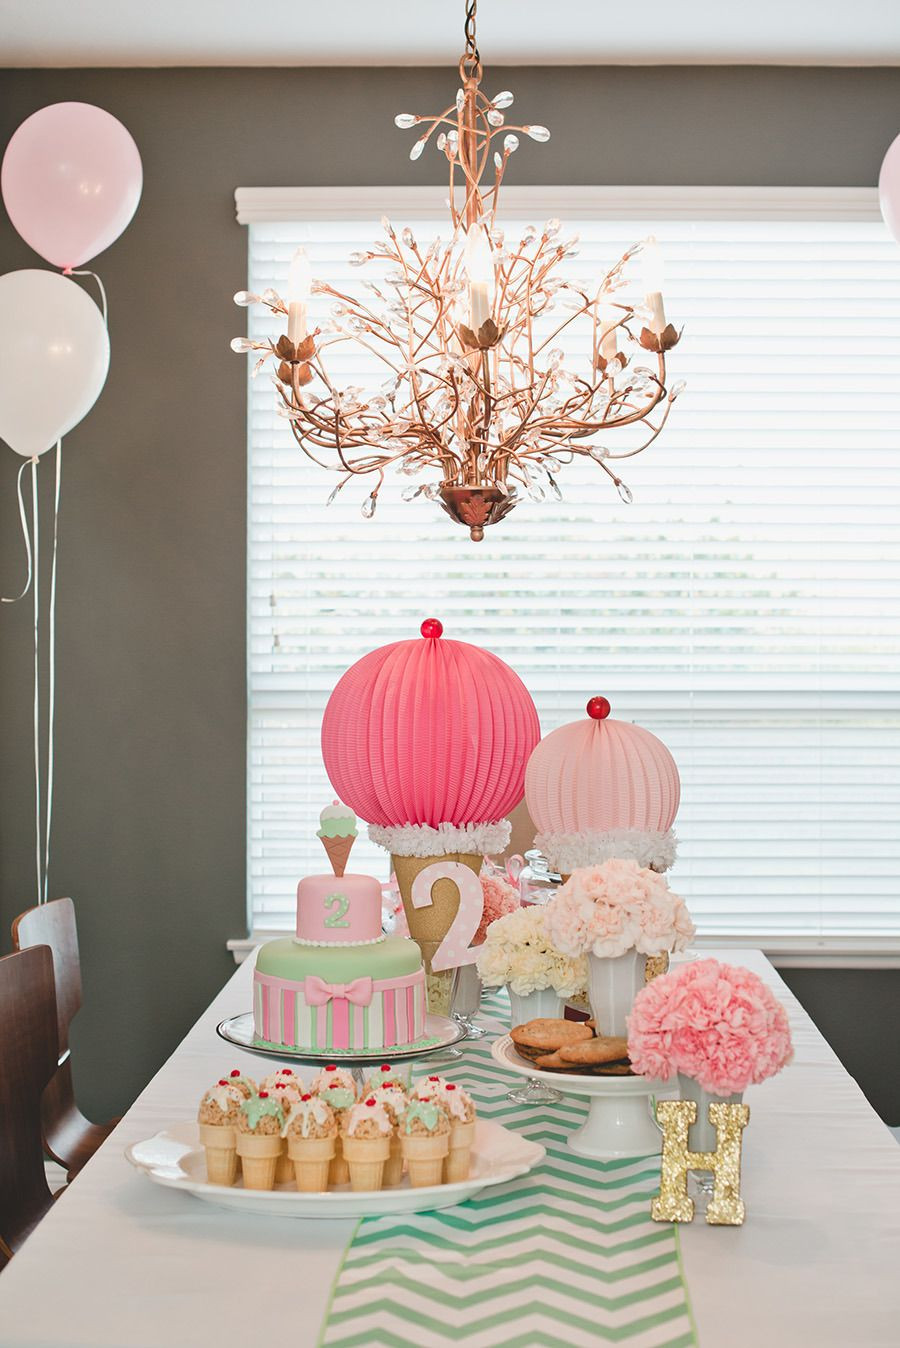 Birthday Party Table Decoration Ideas
 Hannah s Ice Cream Parlor Party in 2019